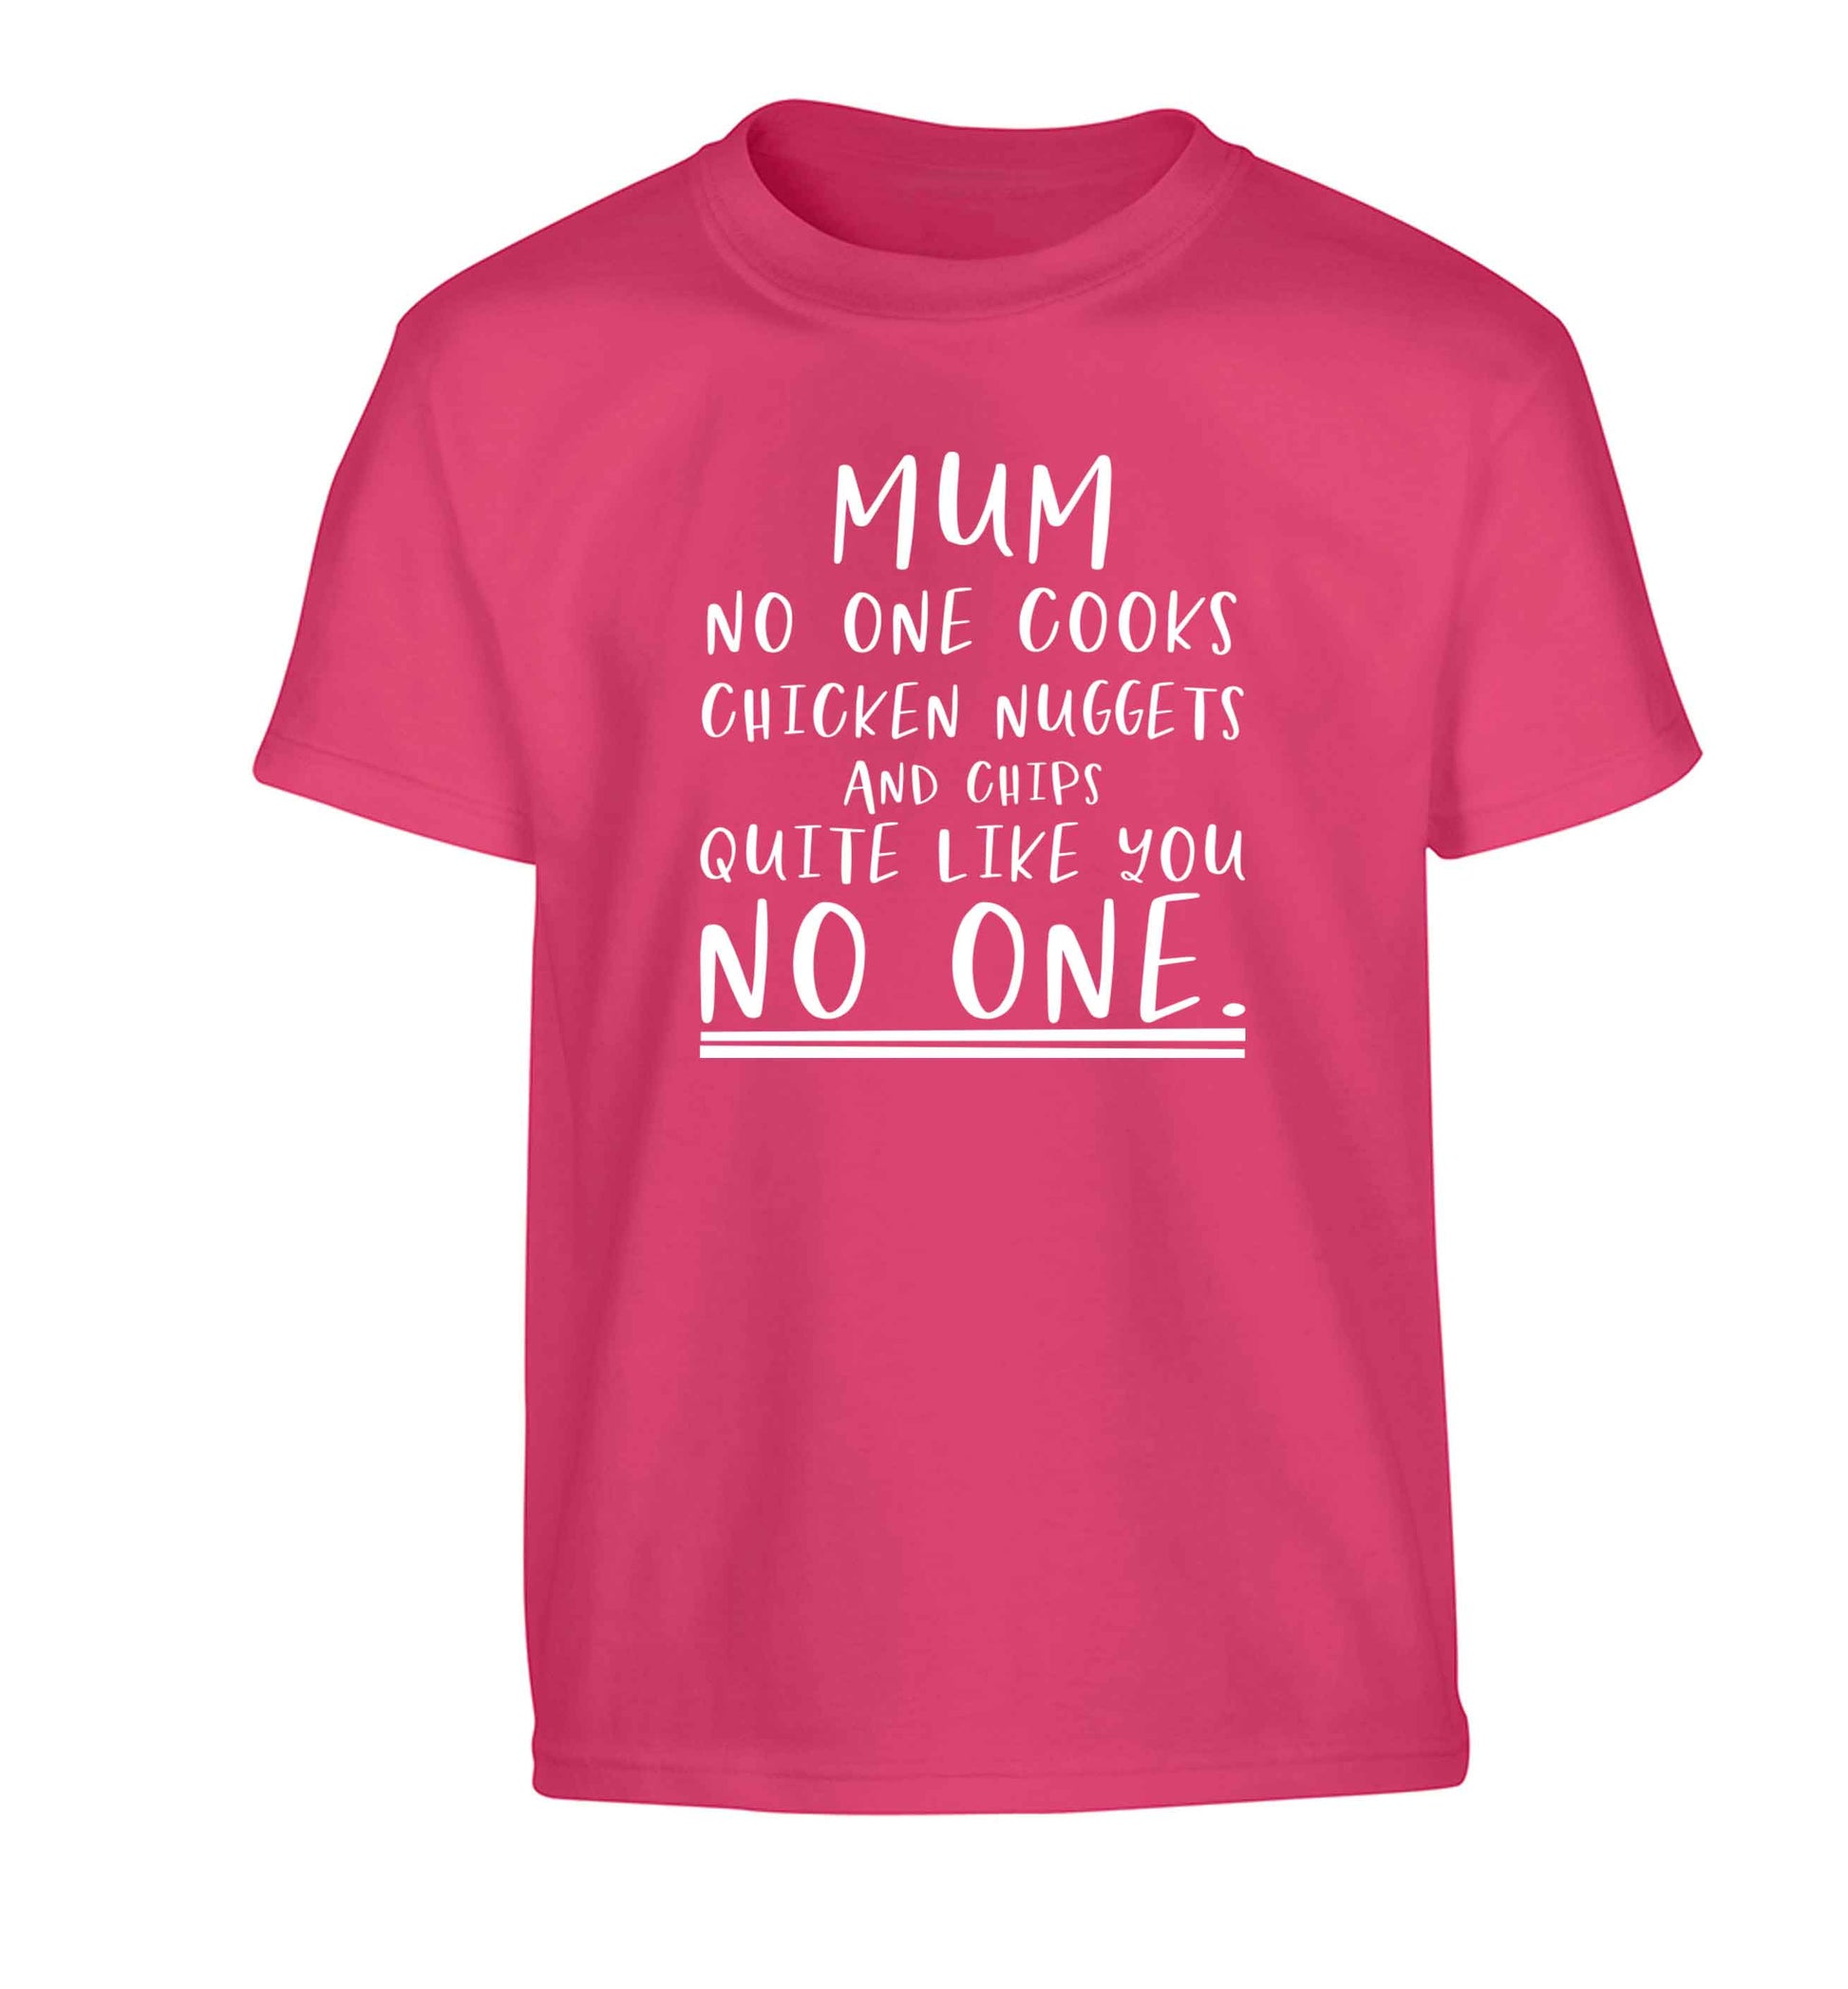 Super funny sassy gift for mother's day or birthday!  Mum no one cooks chicken nuggets and chips like you no one Children's pink Tshirt 12-13 Years